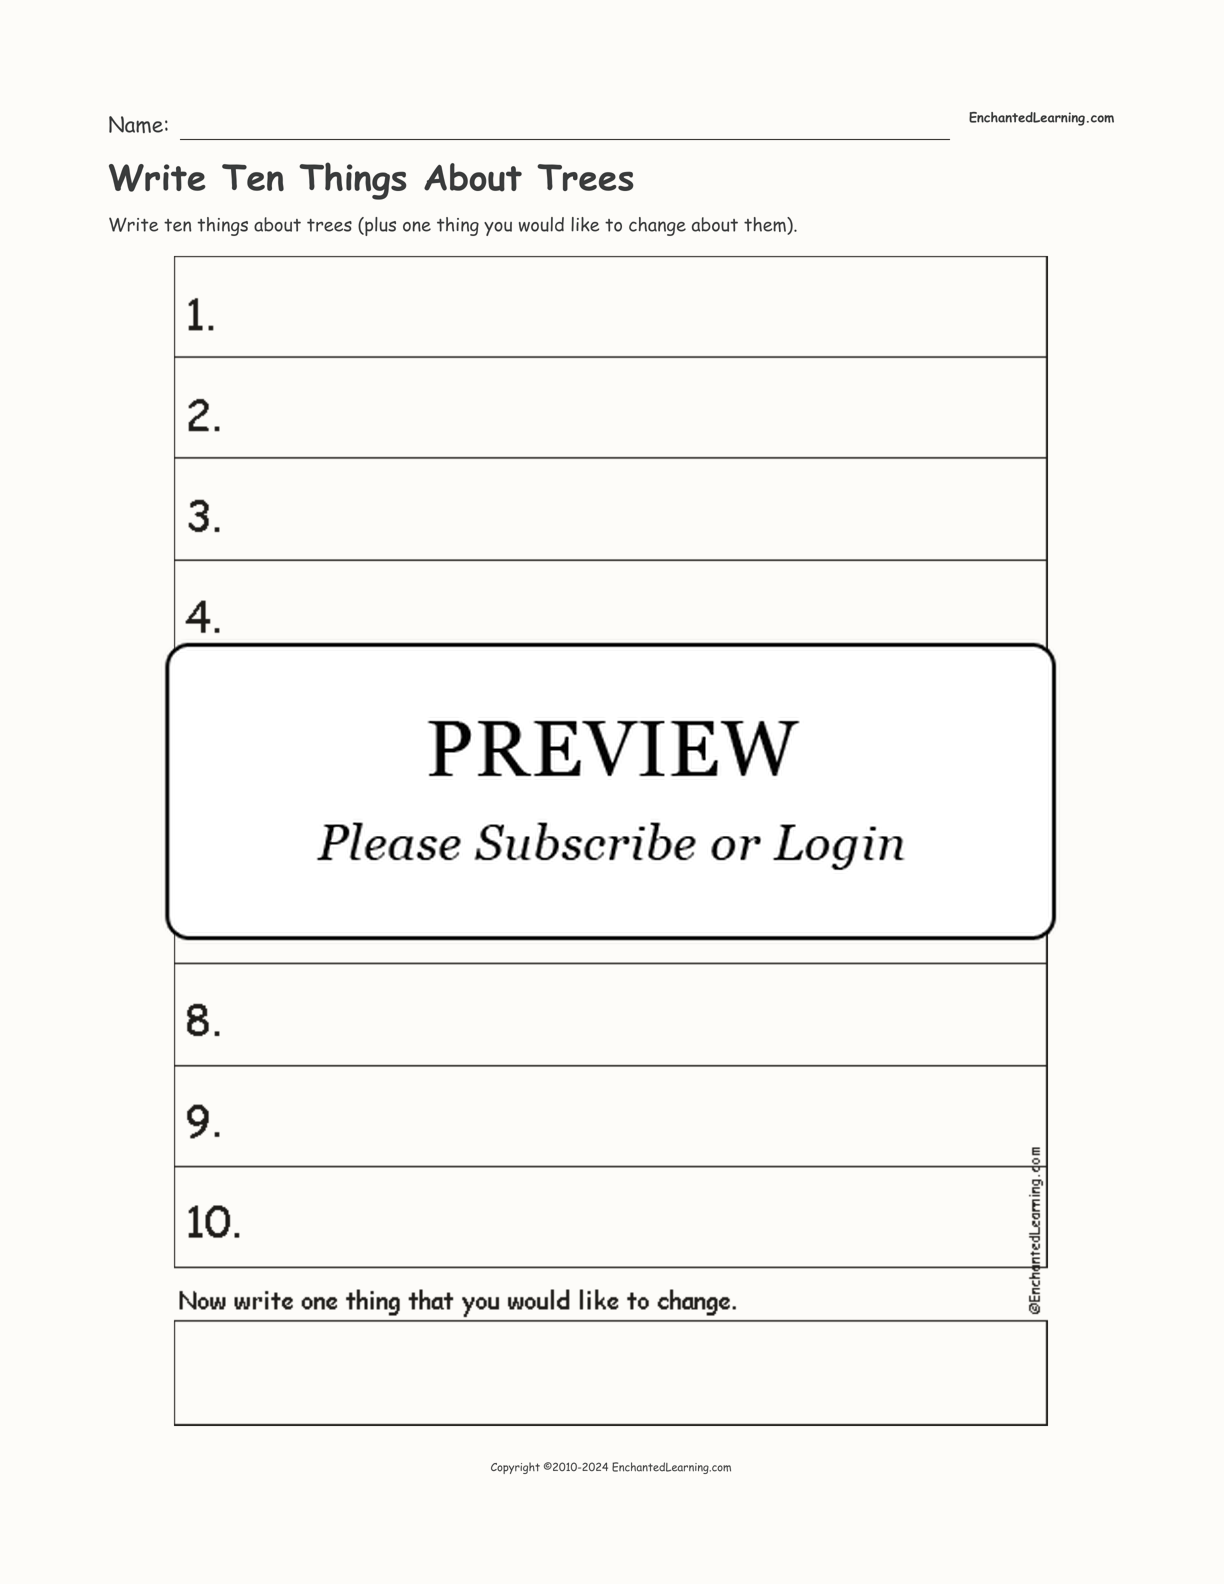 Write Ten Things About Trees interactive worksheet page 1